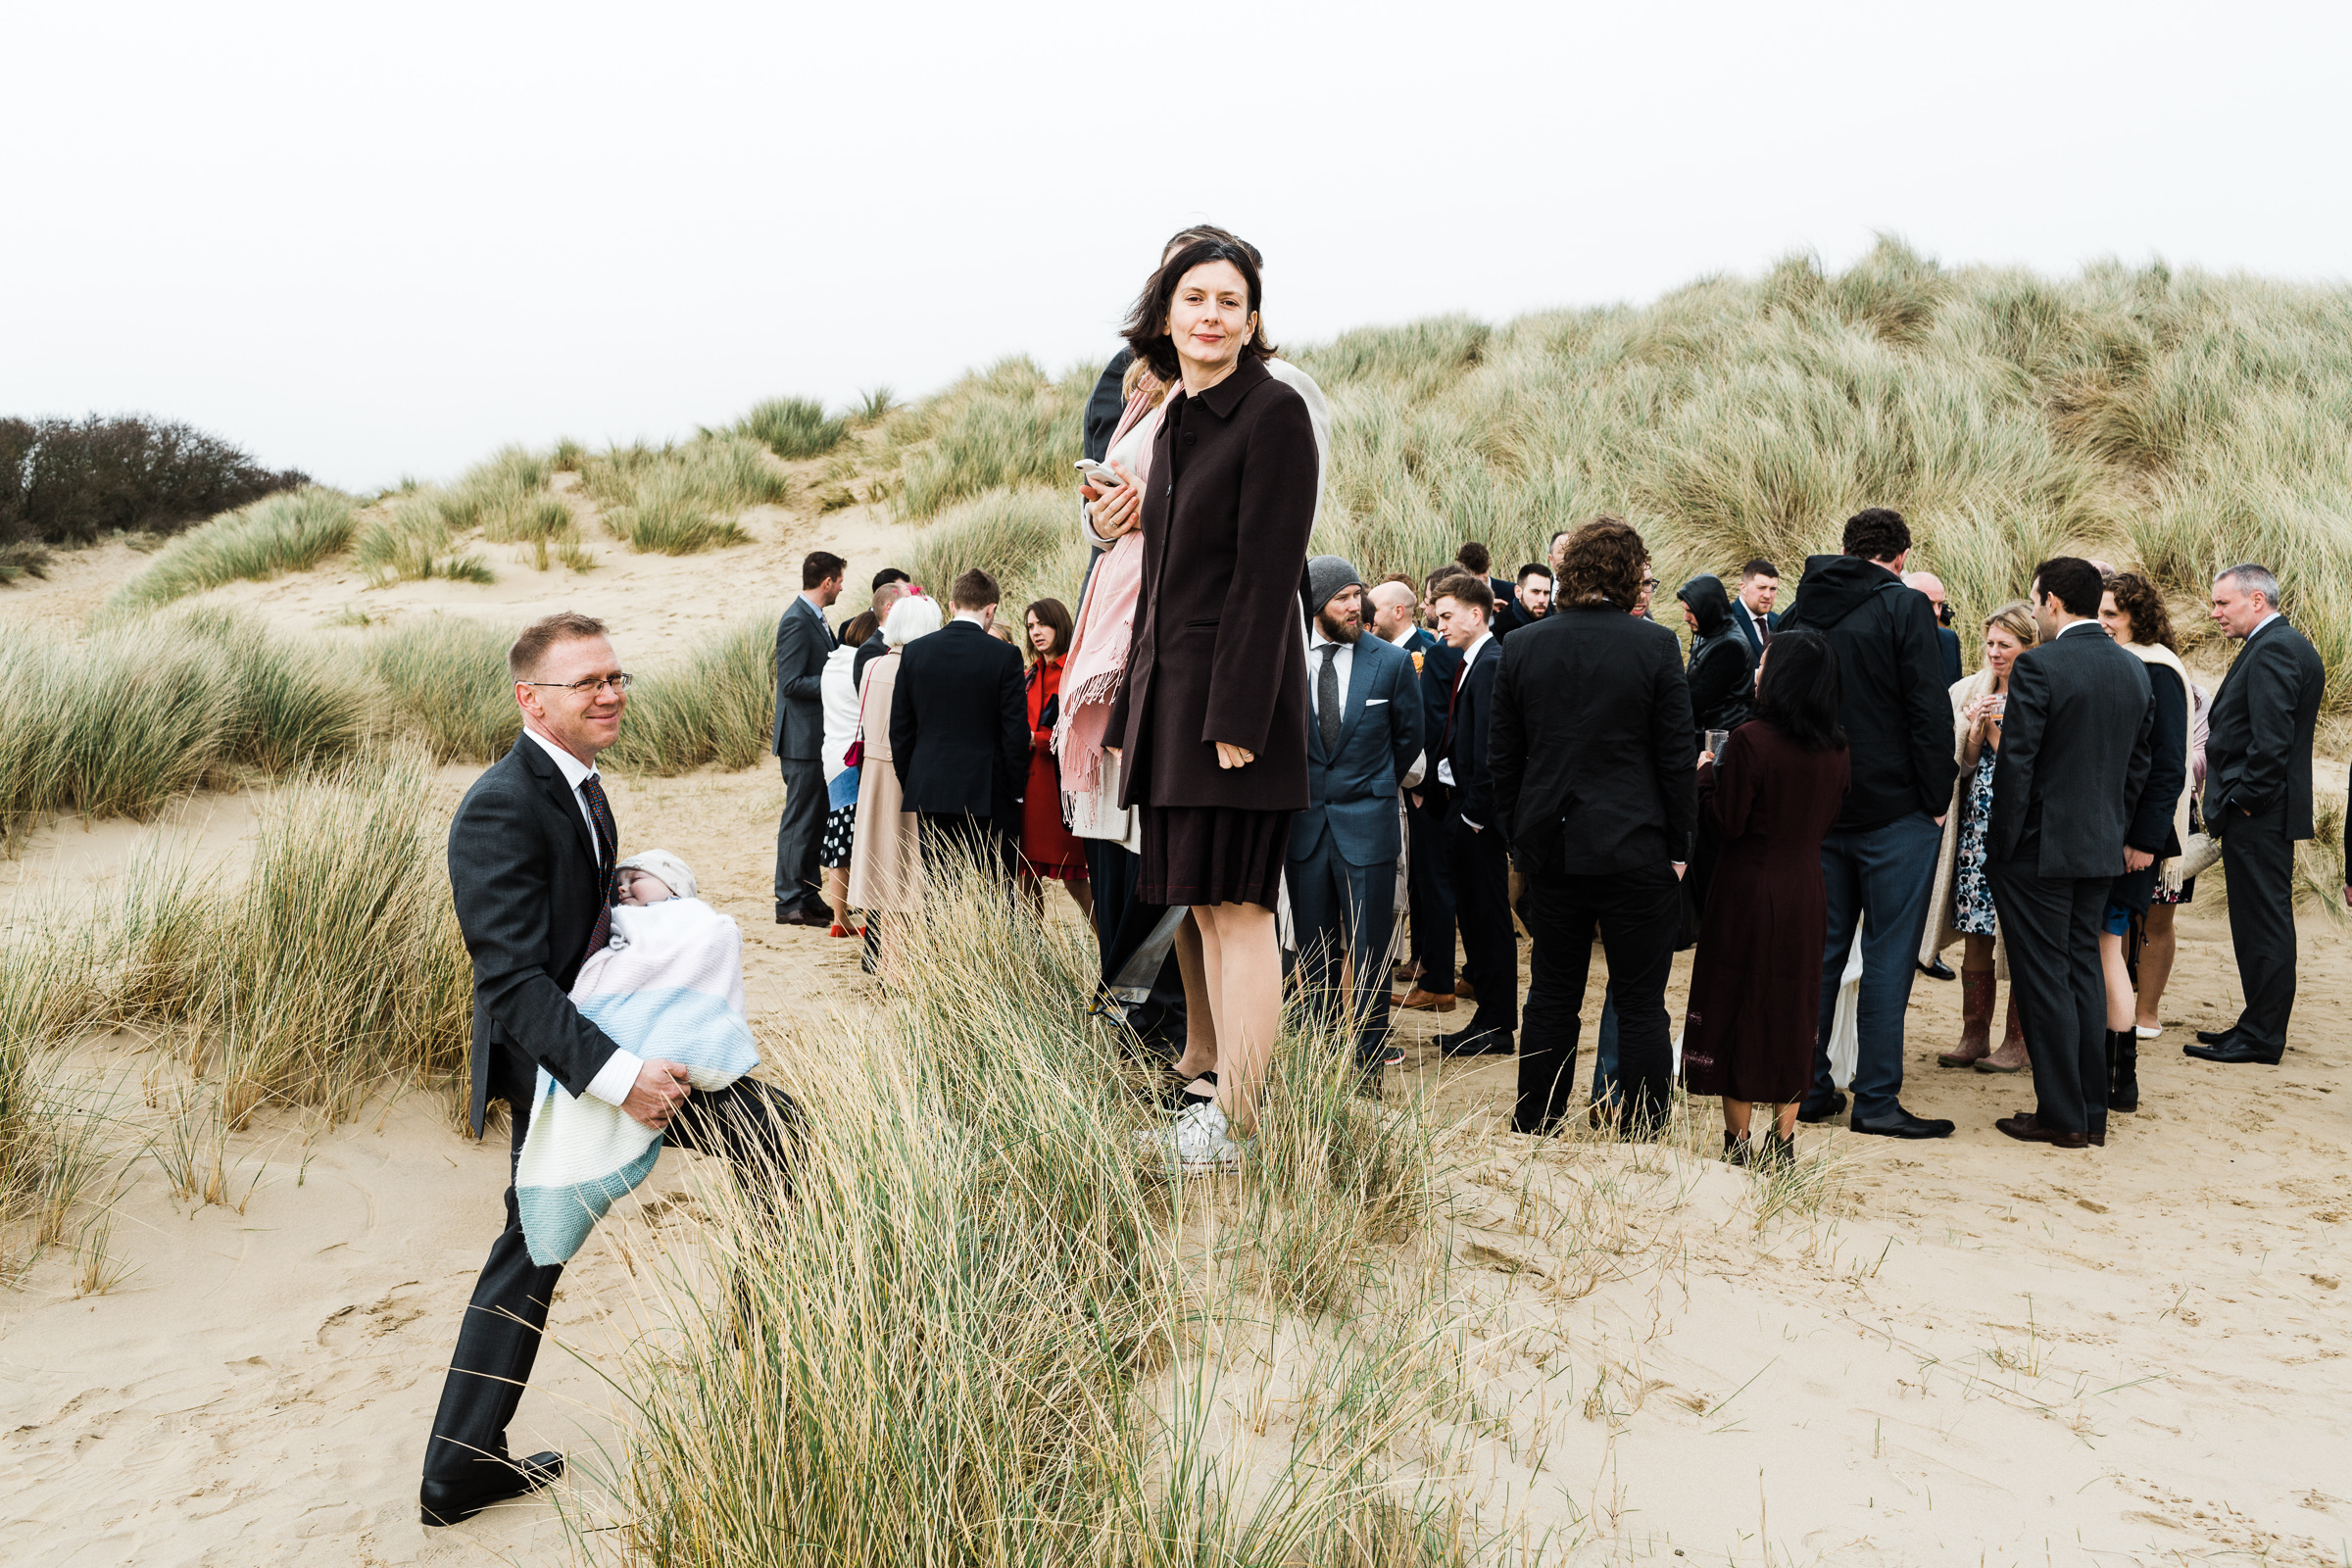 A woman standing on a sand dune and a man holding a baby. Wedding guests are in the background. They are on the beach at Camber Sands.